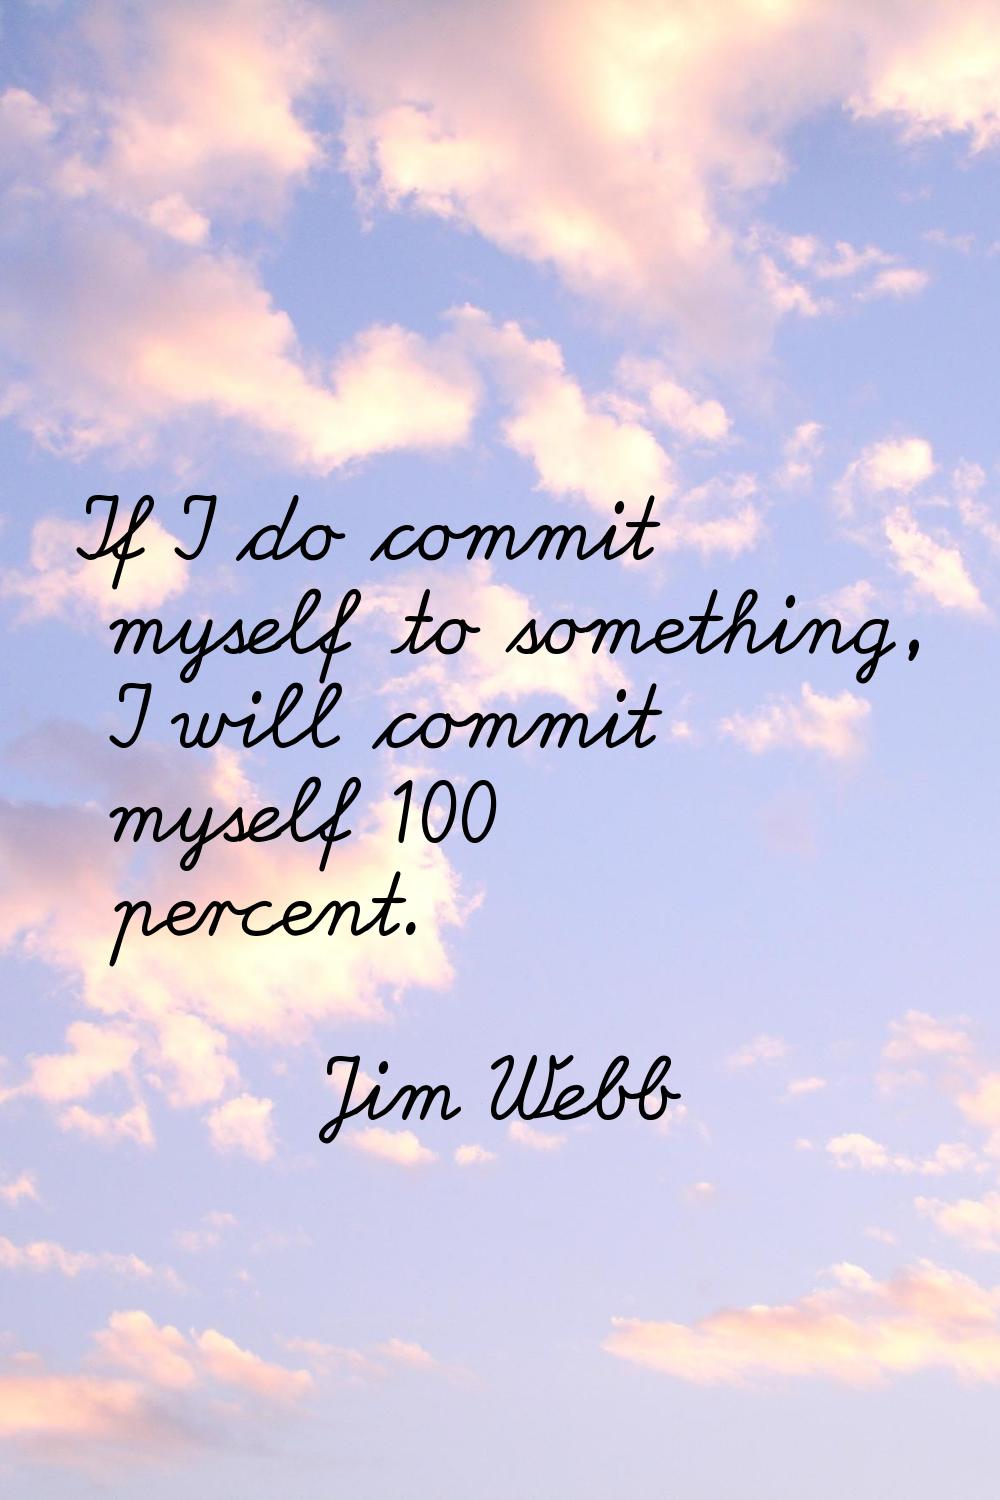 If I do commit myself to something, I will commit myself 100 percent.